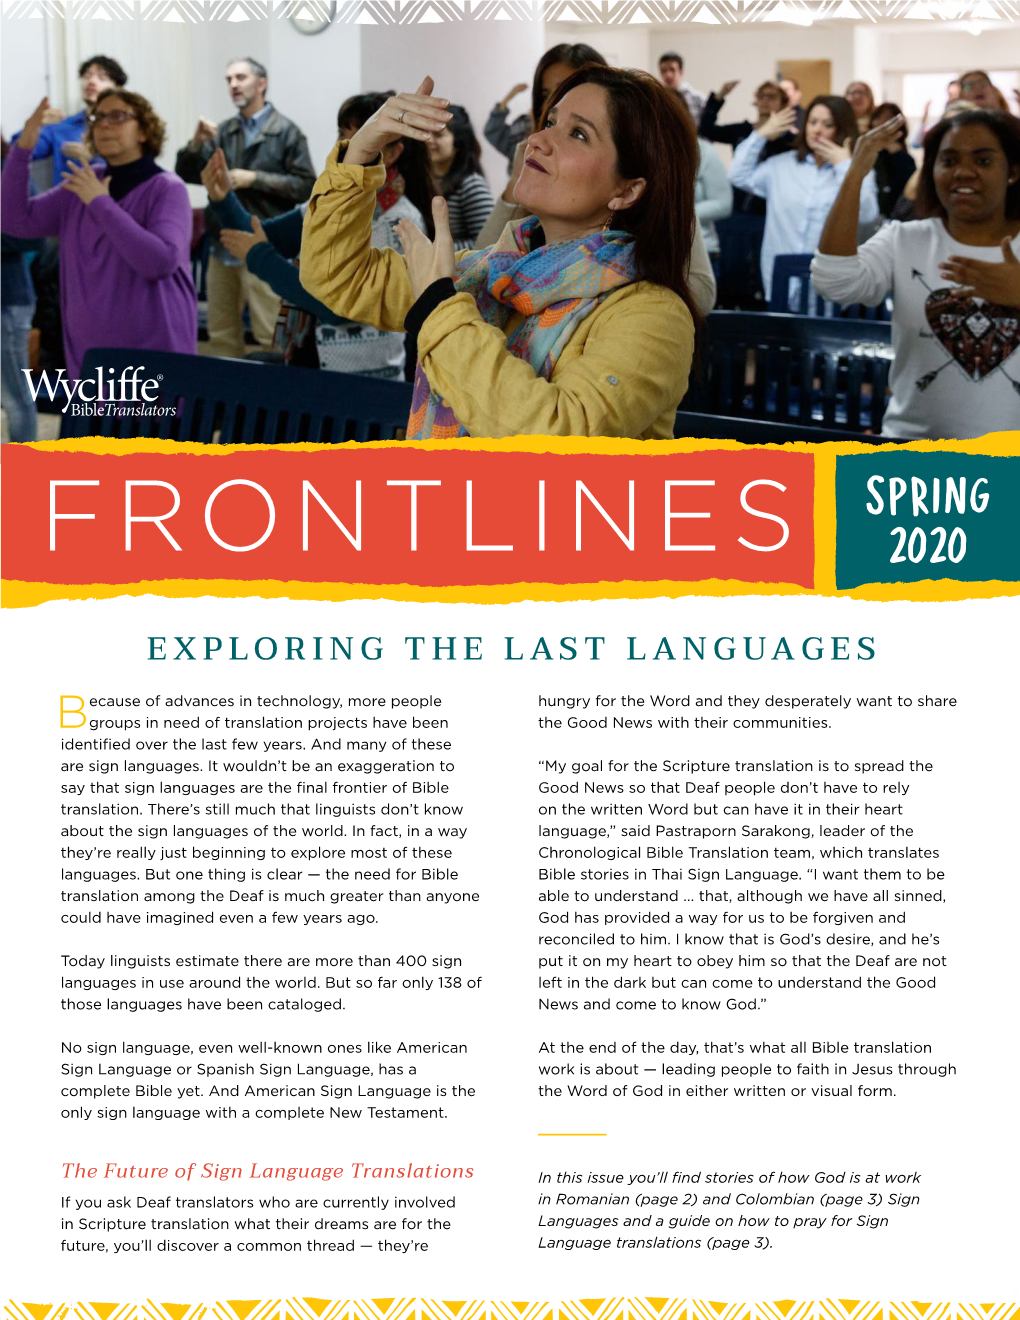 Frontlines Spring